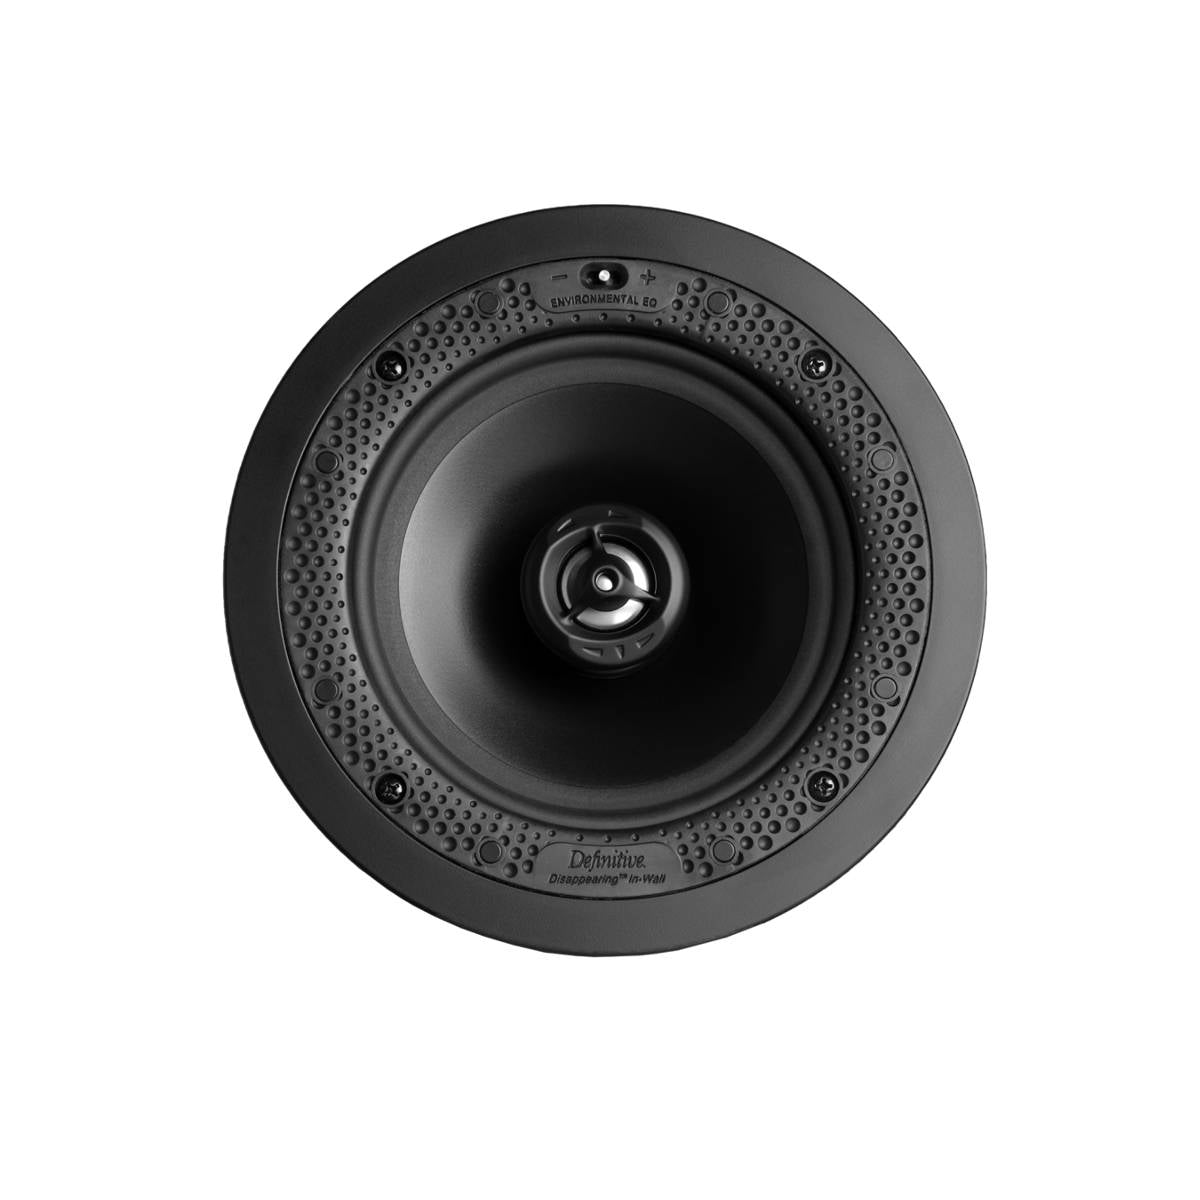 Definitive Technology DI 6.5 R Disappearing™ Series Round 6.5” In-Wall / In-Ceiling Speaker (Each) - Ooberpad